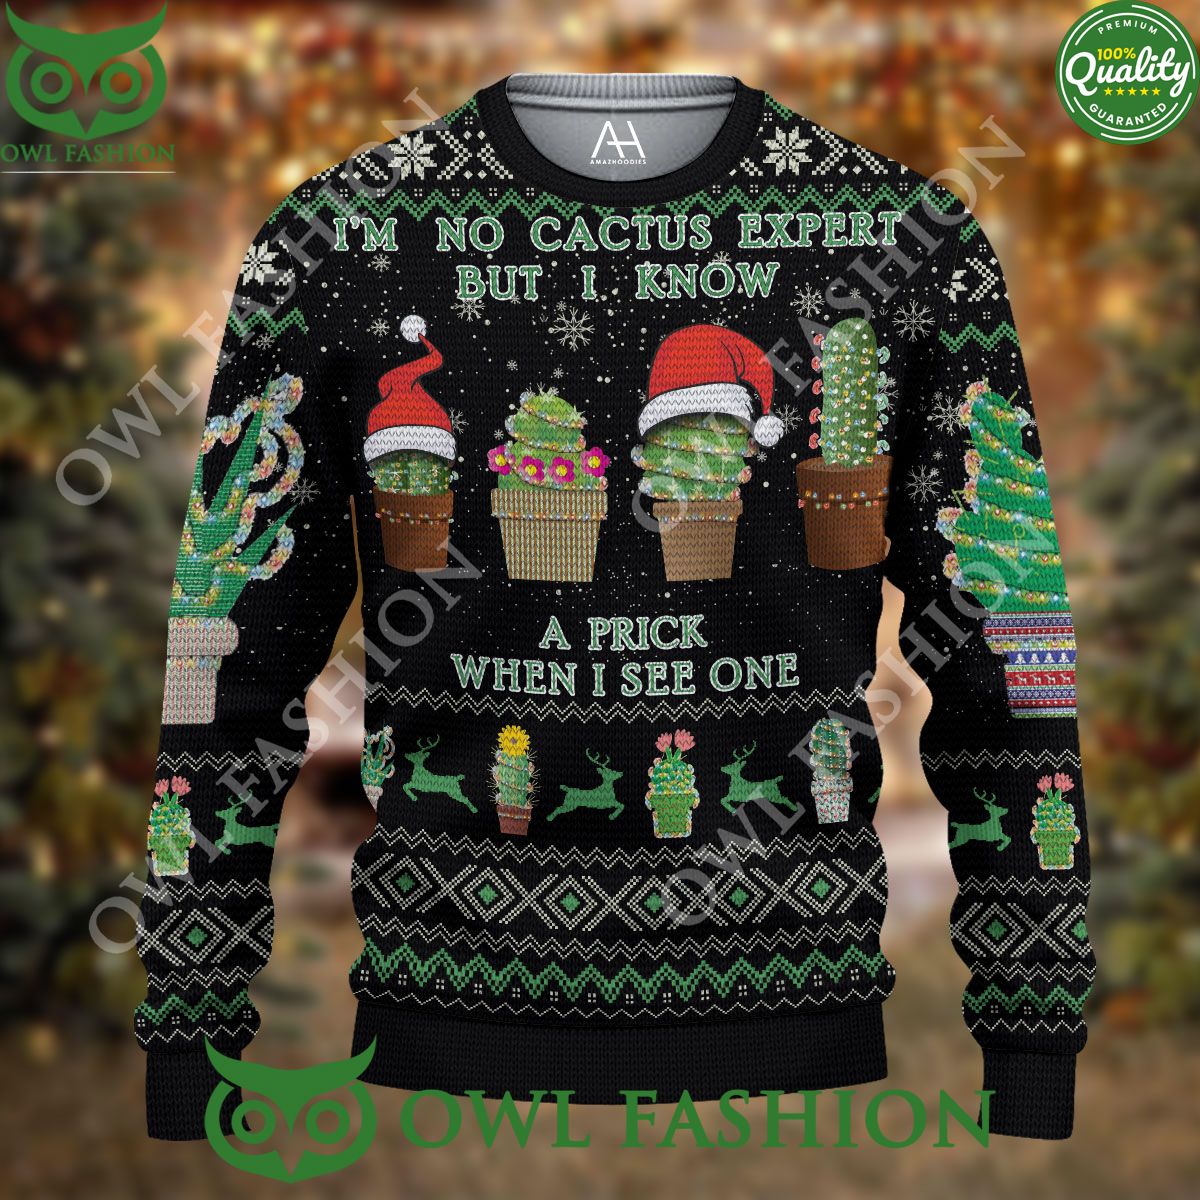 I'm No Cactus Expert Premium Ugly Sweater Sizzling